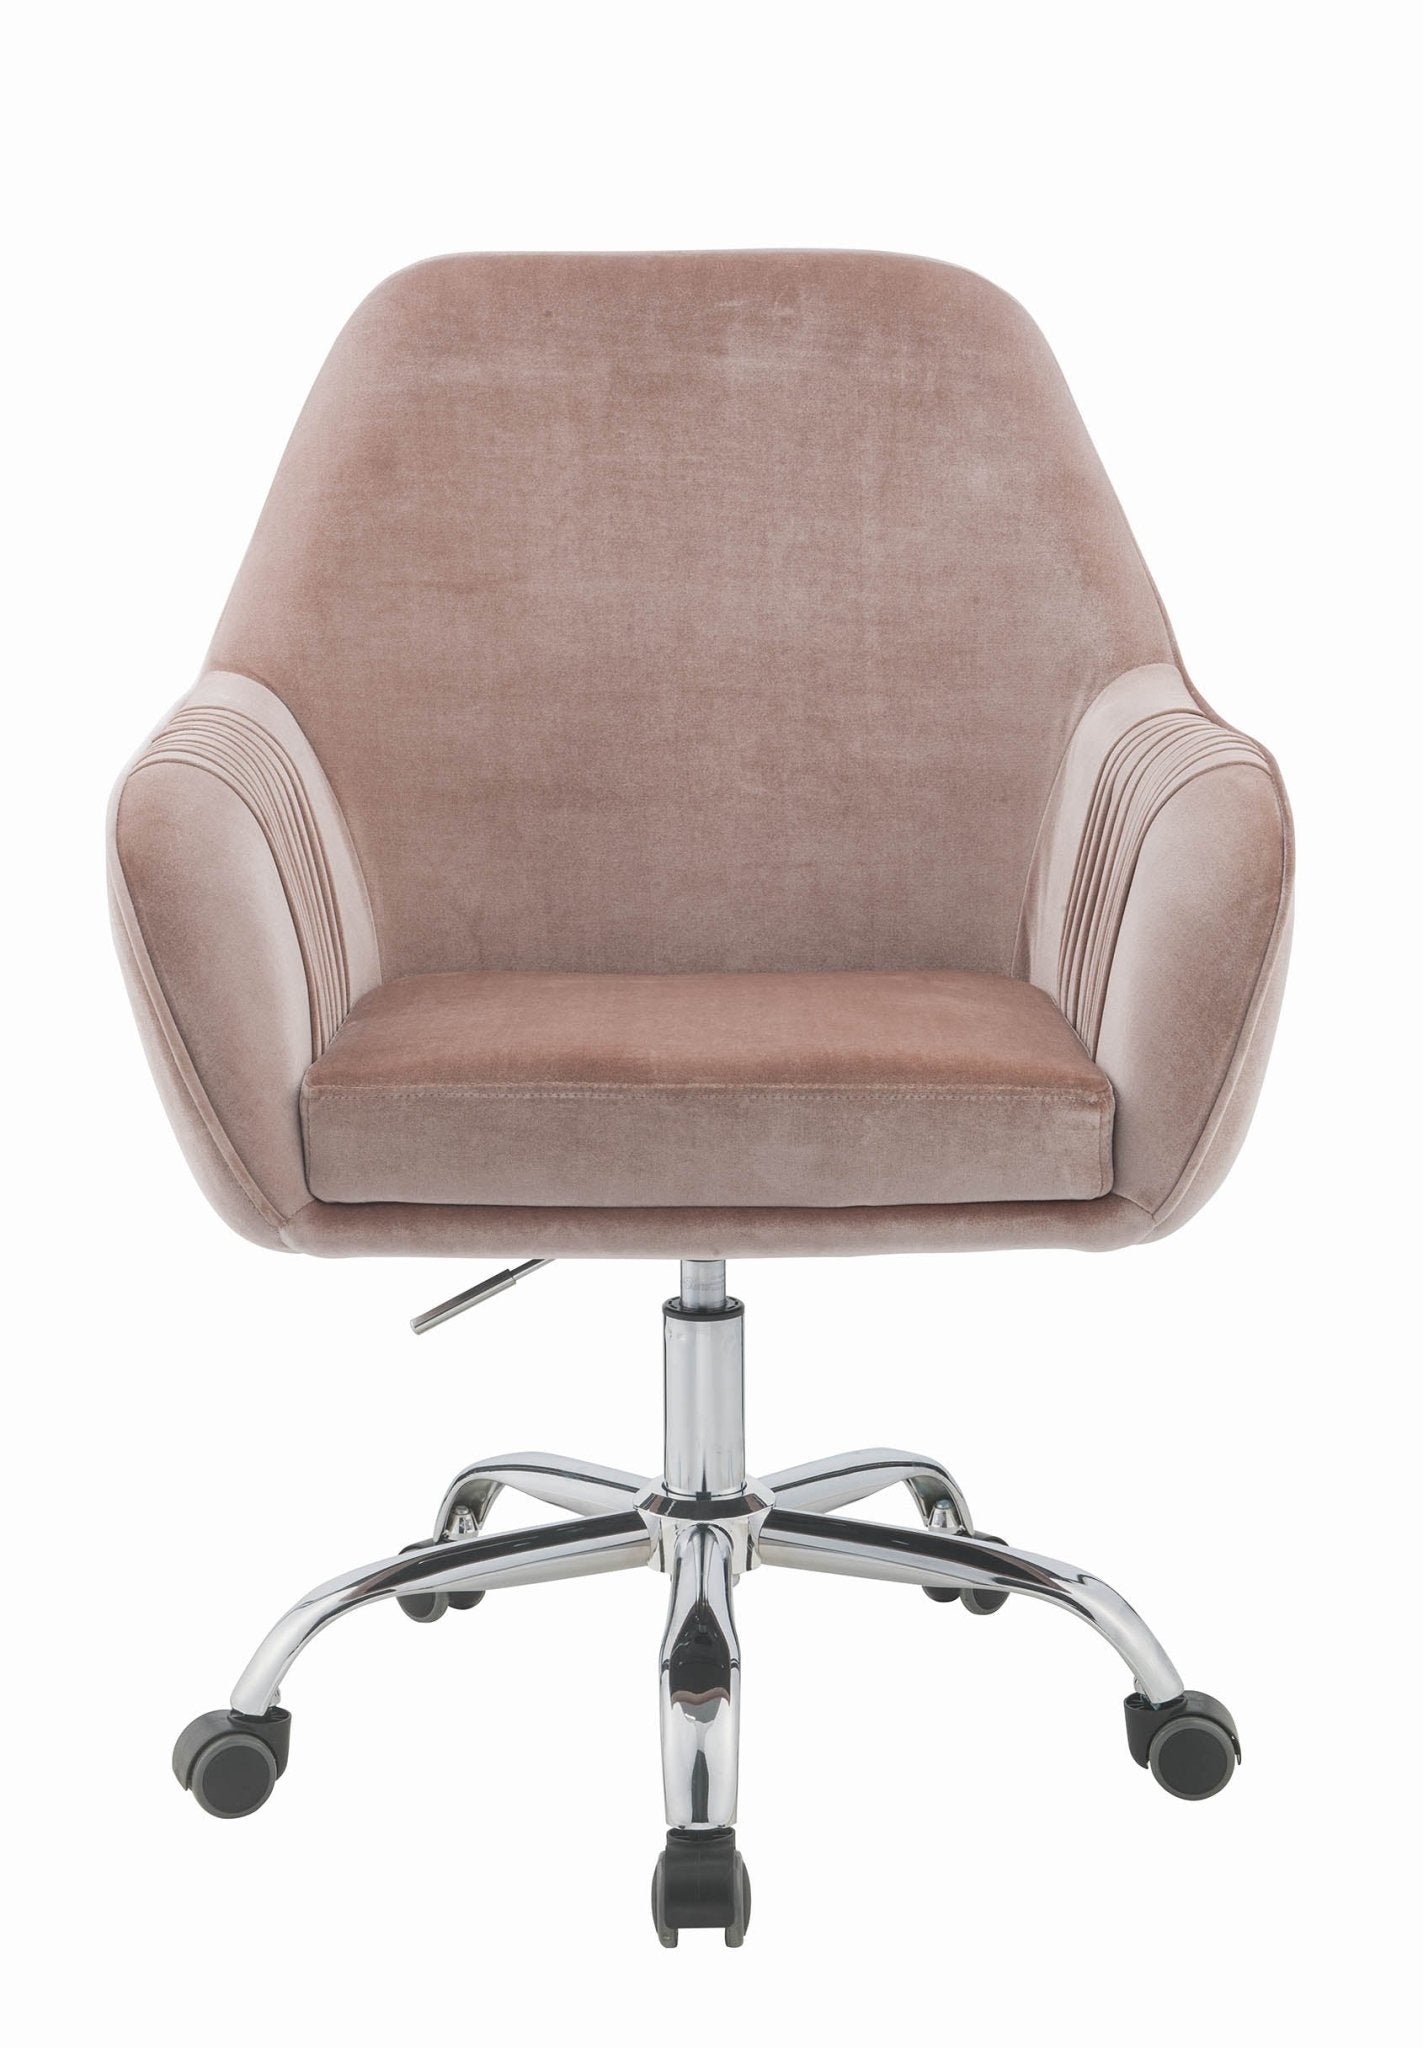 Dusty Rose Velvet Seat Swivel Adjustable Task Chair Fabric Back Steel Frame - Tuesday Morning-Office Chairs